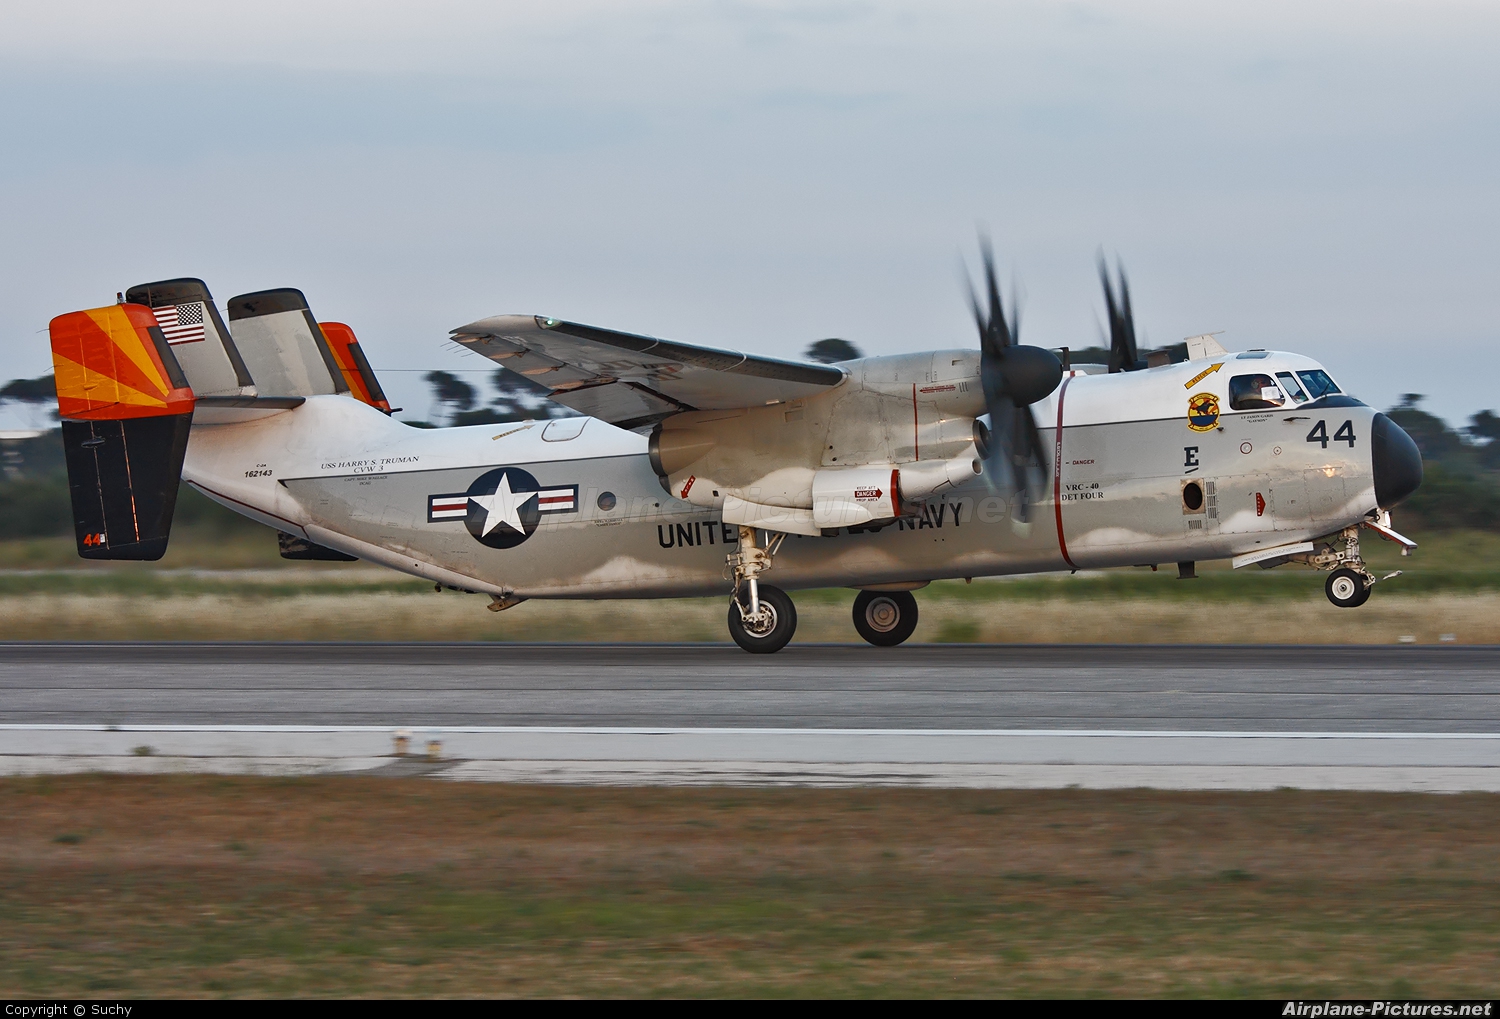 Grumman C-2 Greyhound Backgrounds, Compatible - PC, Mobile, Gadgets| 1500x1019 px